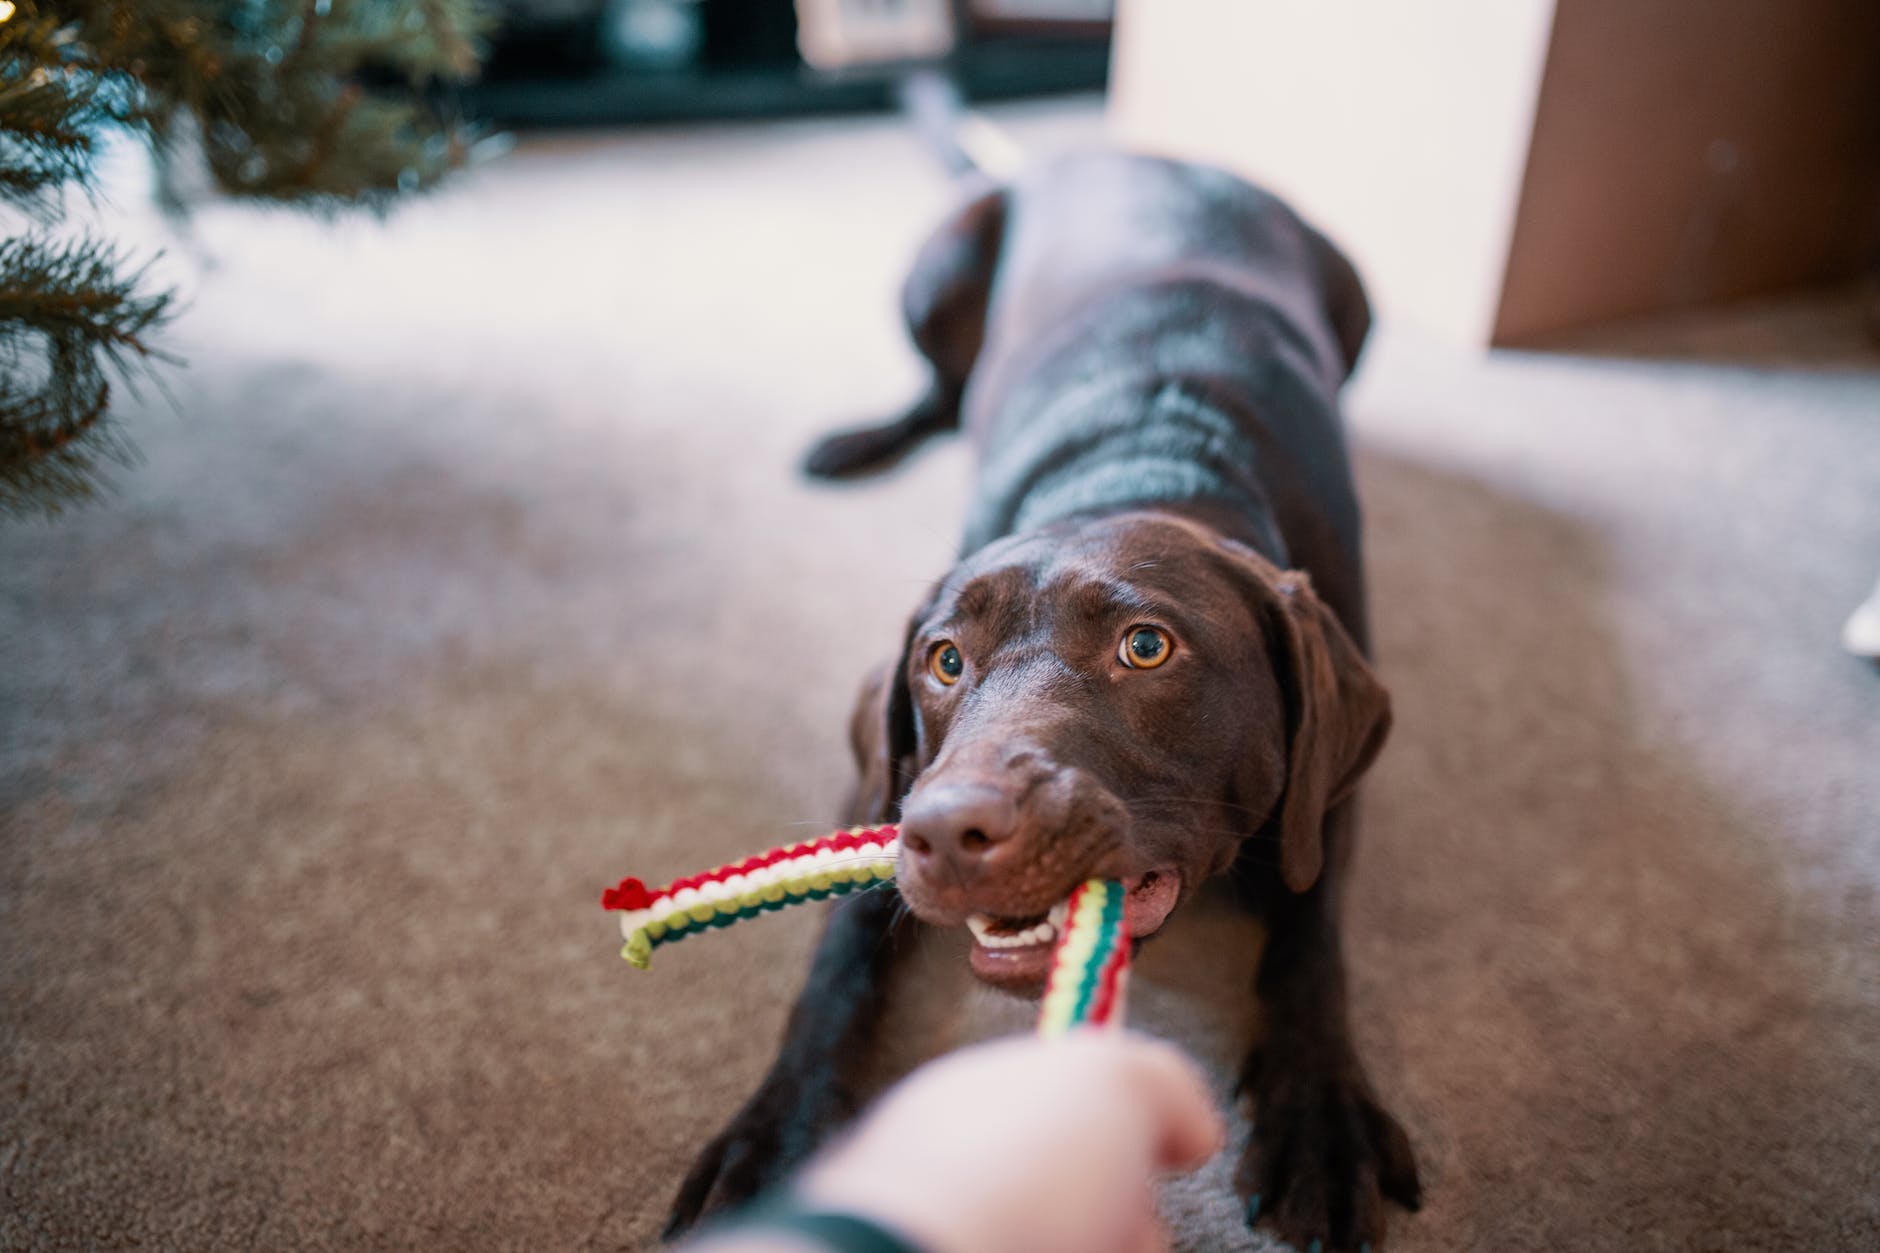 The Best Interactive Dog Toys For Your Canine Companion